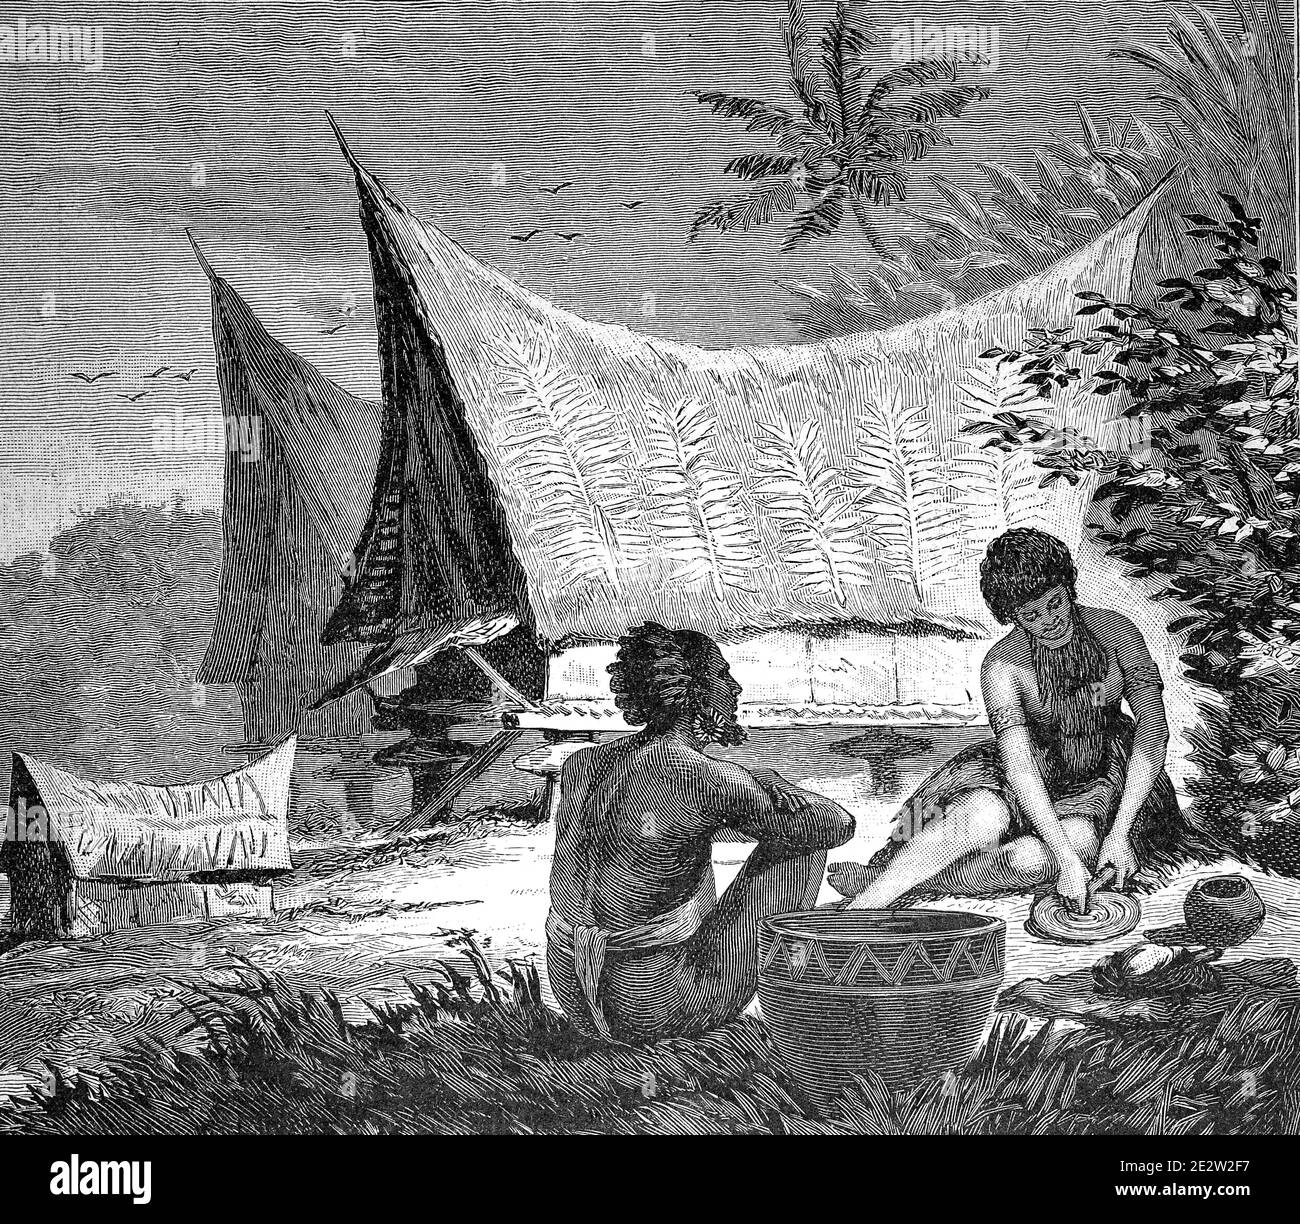 Houses and tombs in house form on Ehas, island of East New Guinea, illustration from 1880, from the voyages of discovery of the German steamer Samoa  /  Häuser und Grabstätten in Hausform auf Ehas, Insel von Ost Neuguinea, Illustration aus 1880, von den Entdeckungsfahrten des deutschen Dampfer Samoa, Historisch, historical, digital improved reproduction of an original from the 19th century / digitale Reproduktion einer Originalvorlage aus dem 19. Jahrhundert, Stock Photo